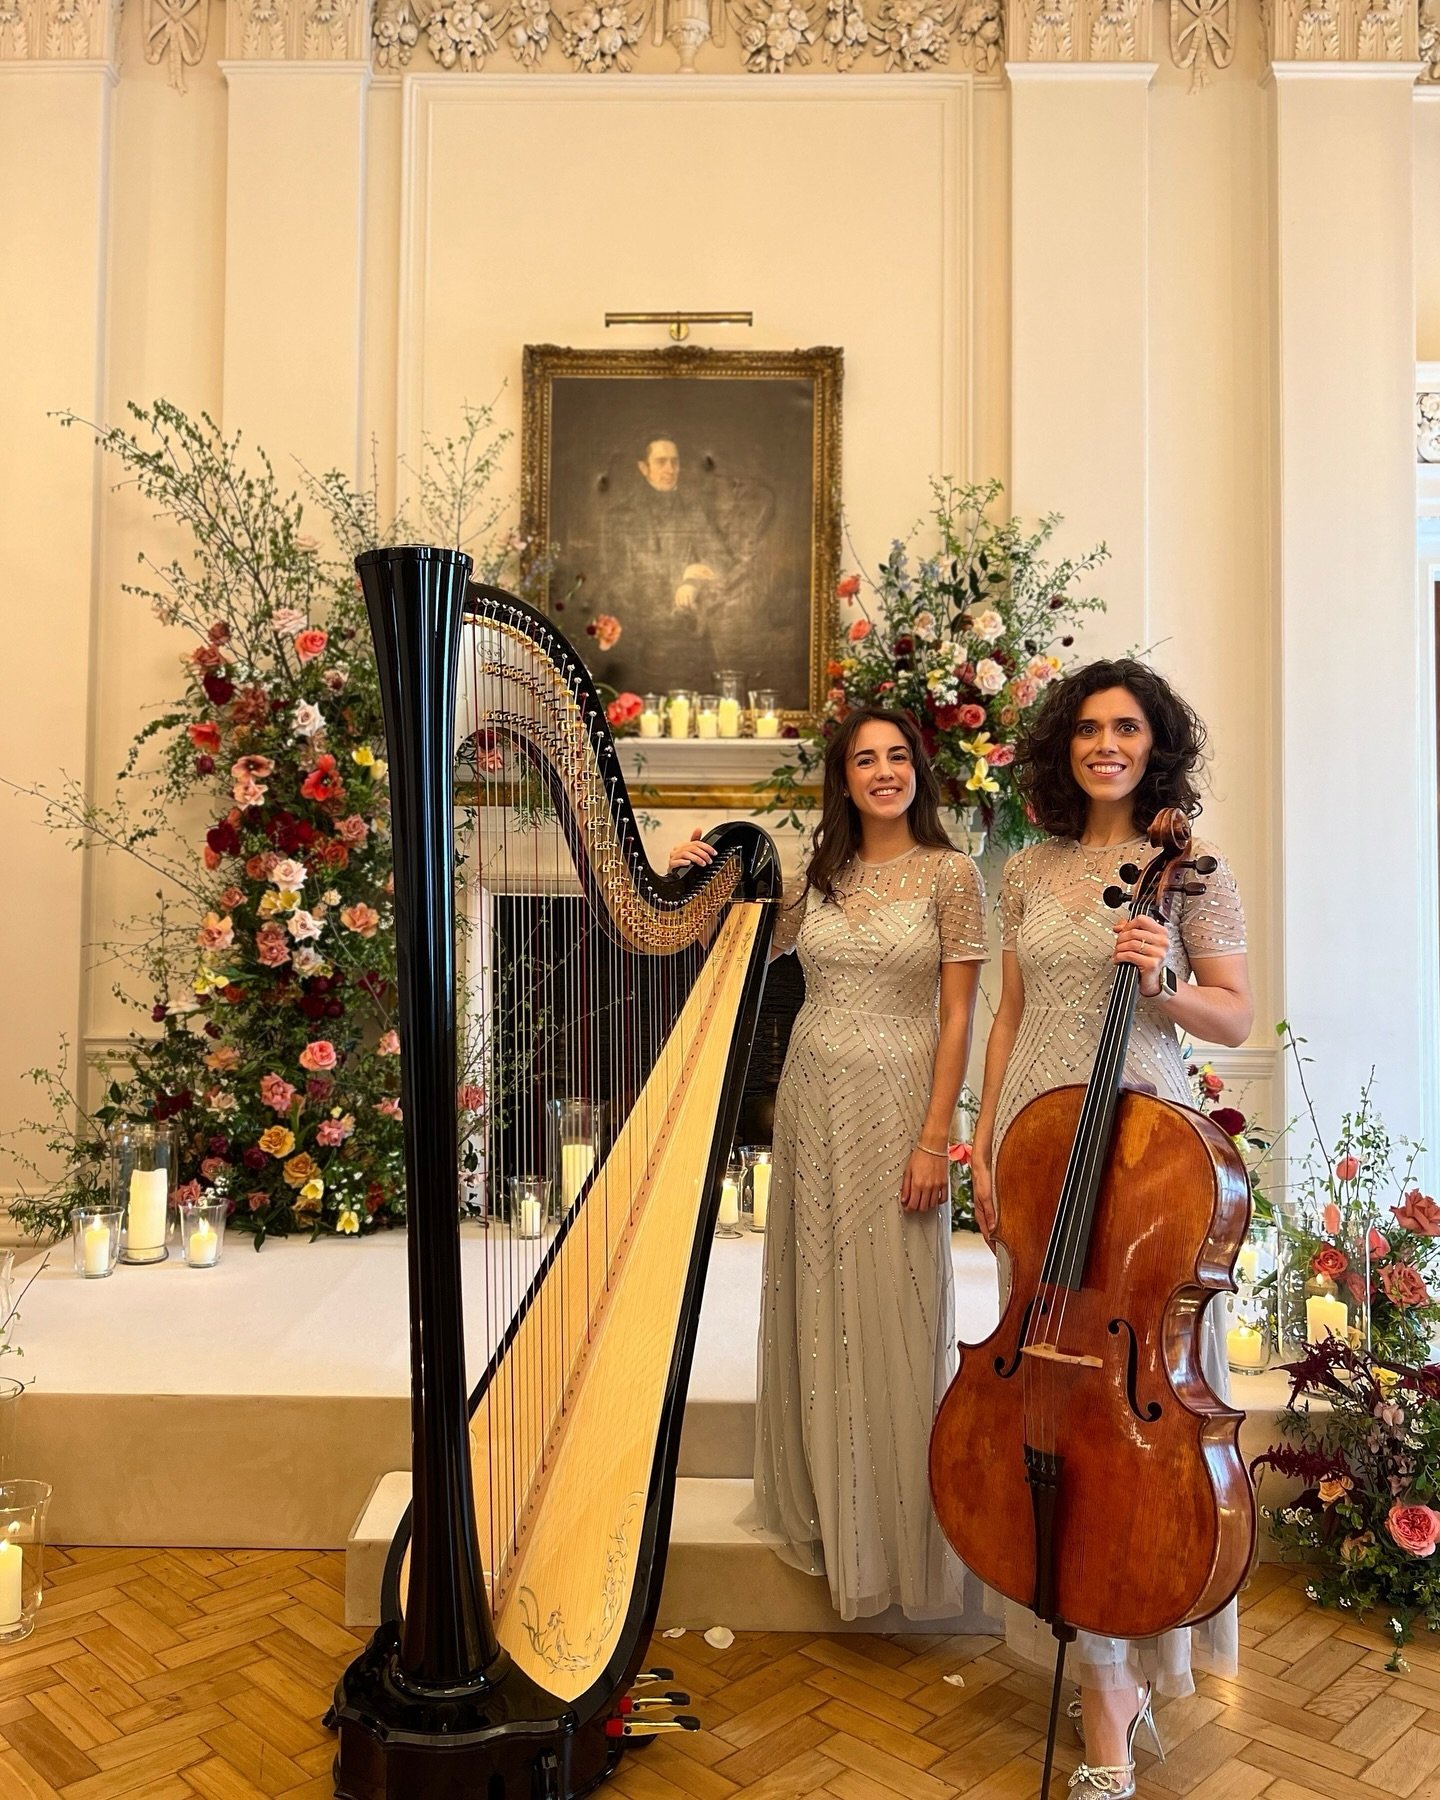 🎶✨ Dressed in harmony with a stunning backdrop at The Ned, our cello and harp duo added a touch of elegance to a magical wedding ceremony. Surrounded by exquisite floral arrangements and the warm glow of candlelight, our music filled the air, weavin